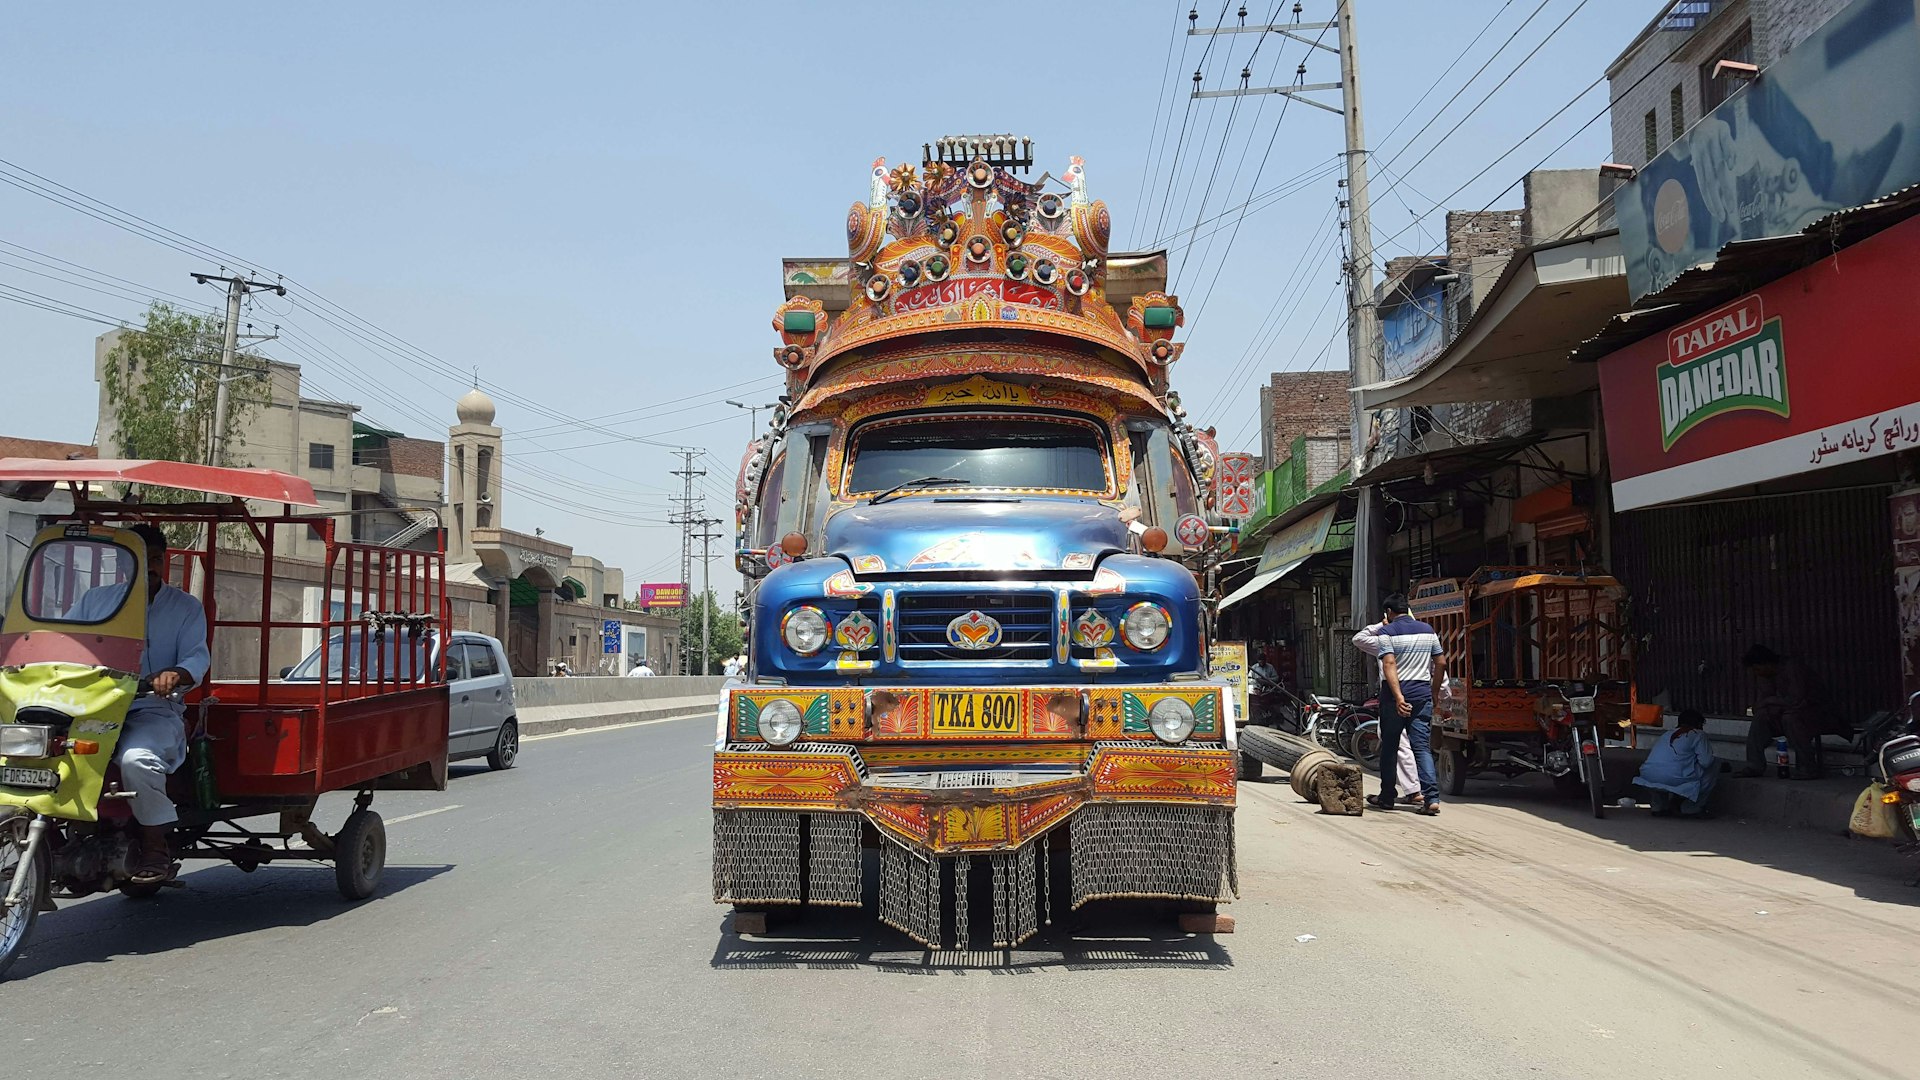 A heavily decorated Bedford truck in Pakistan